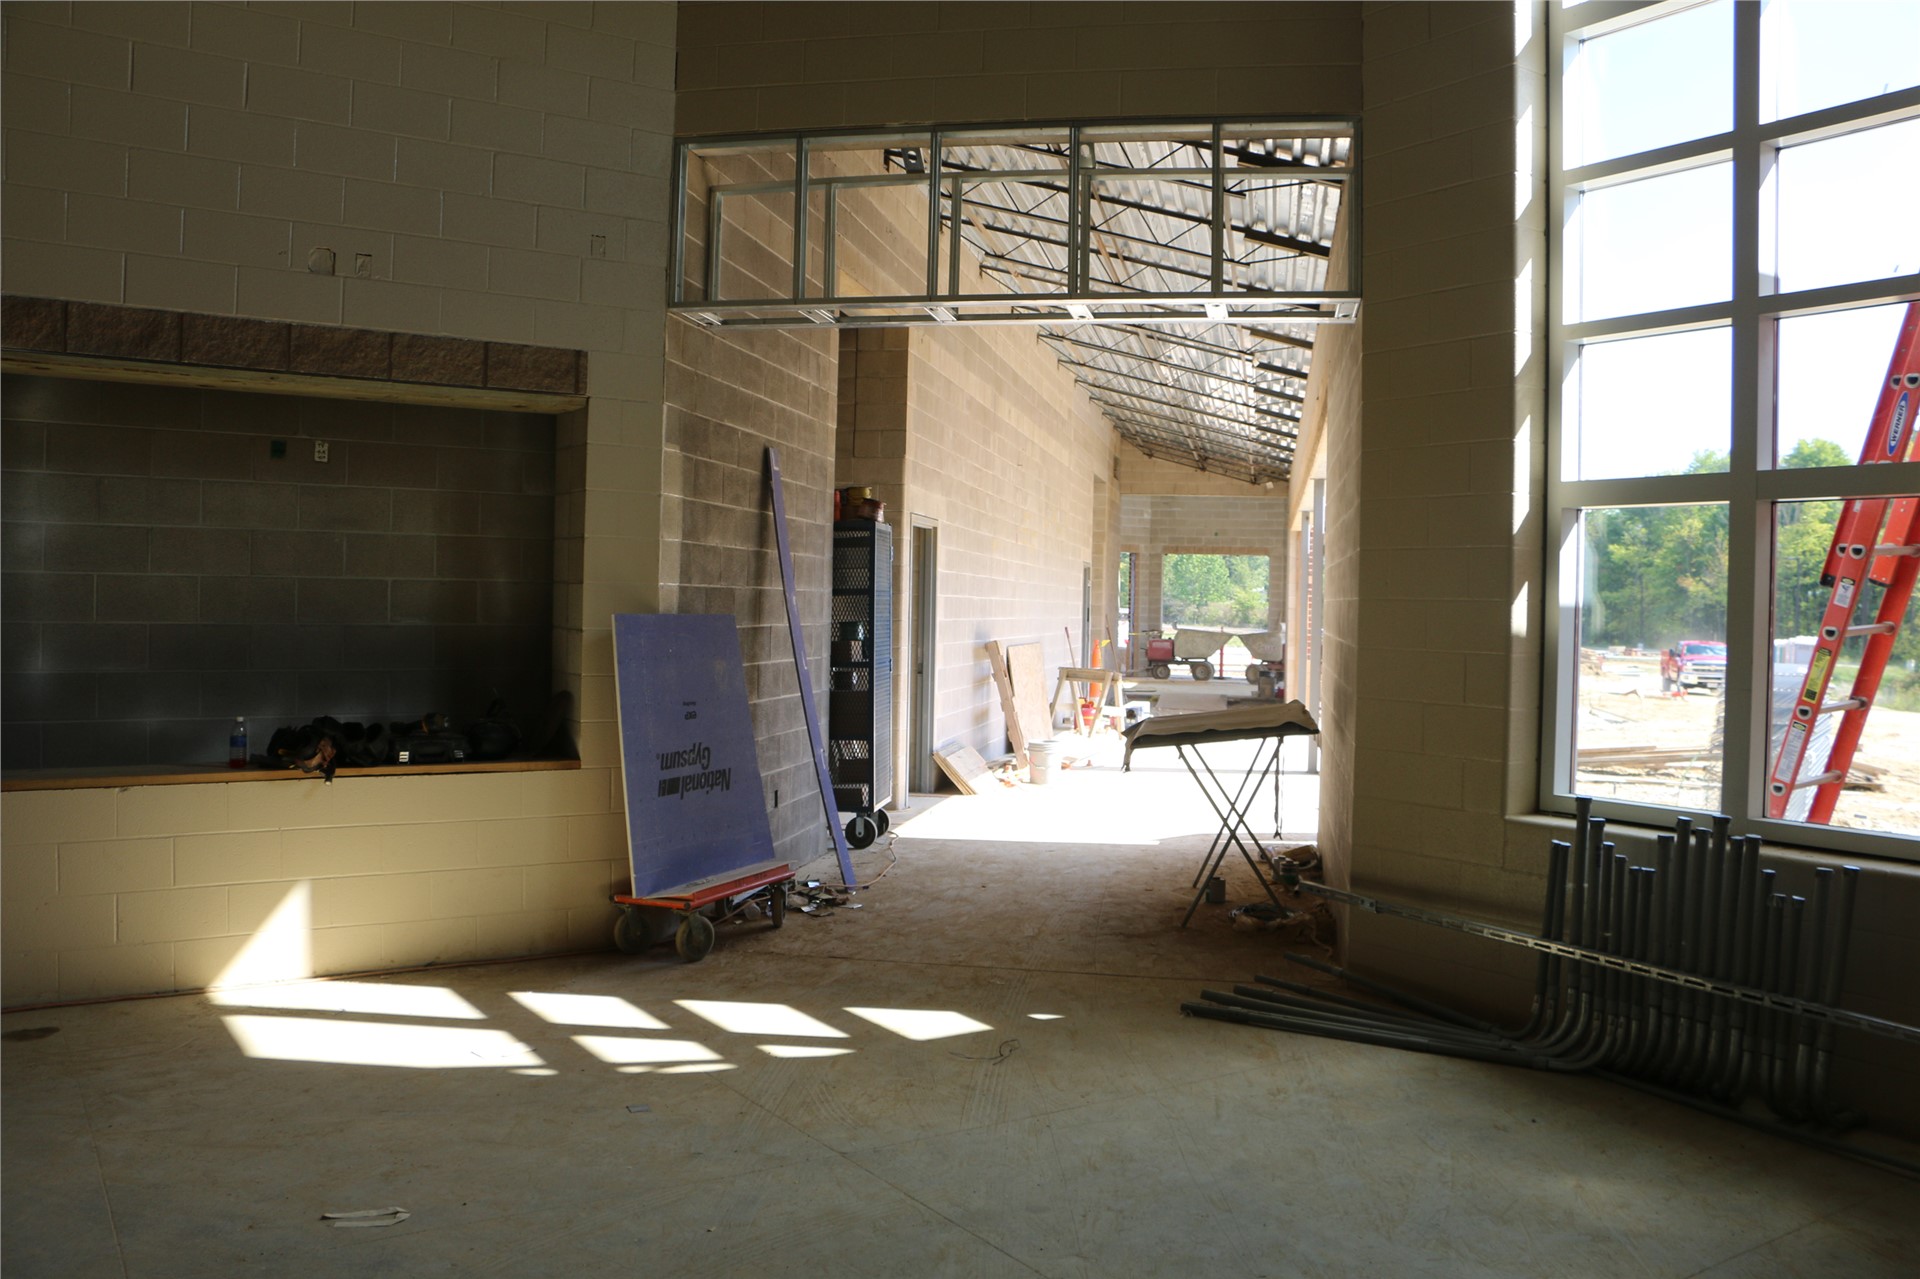 The main hallway in front of the Performing Arts Center